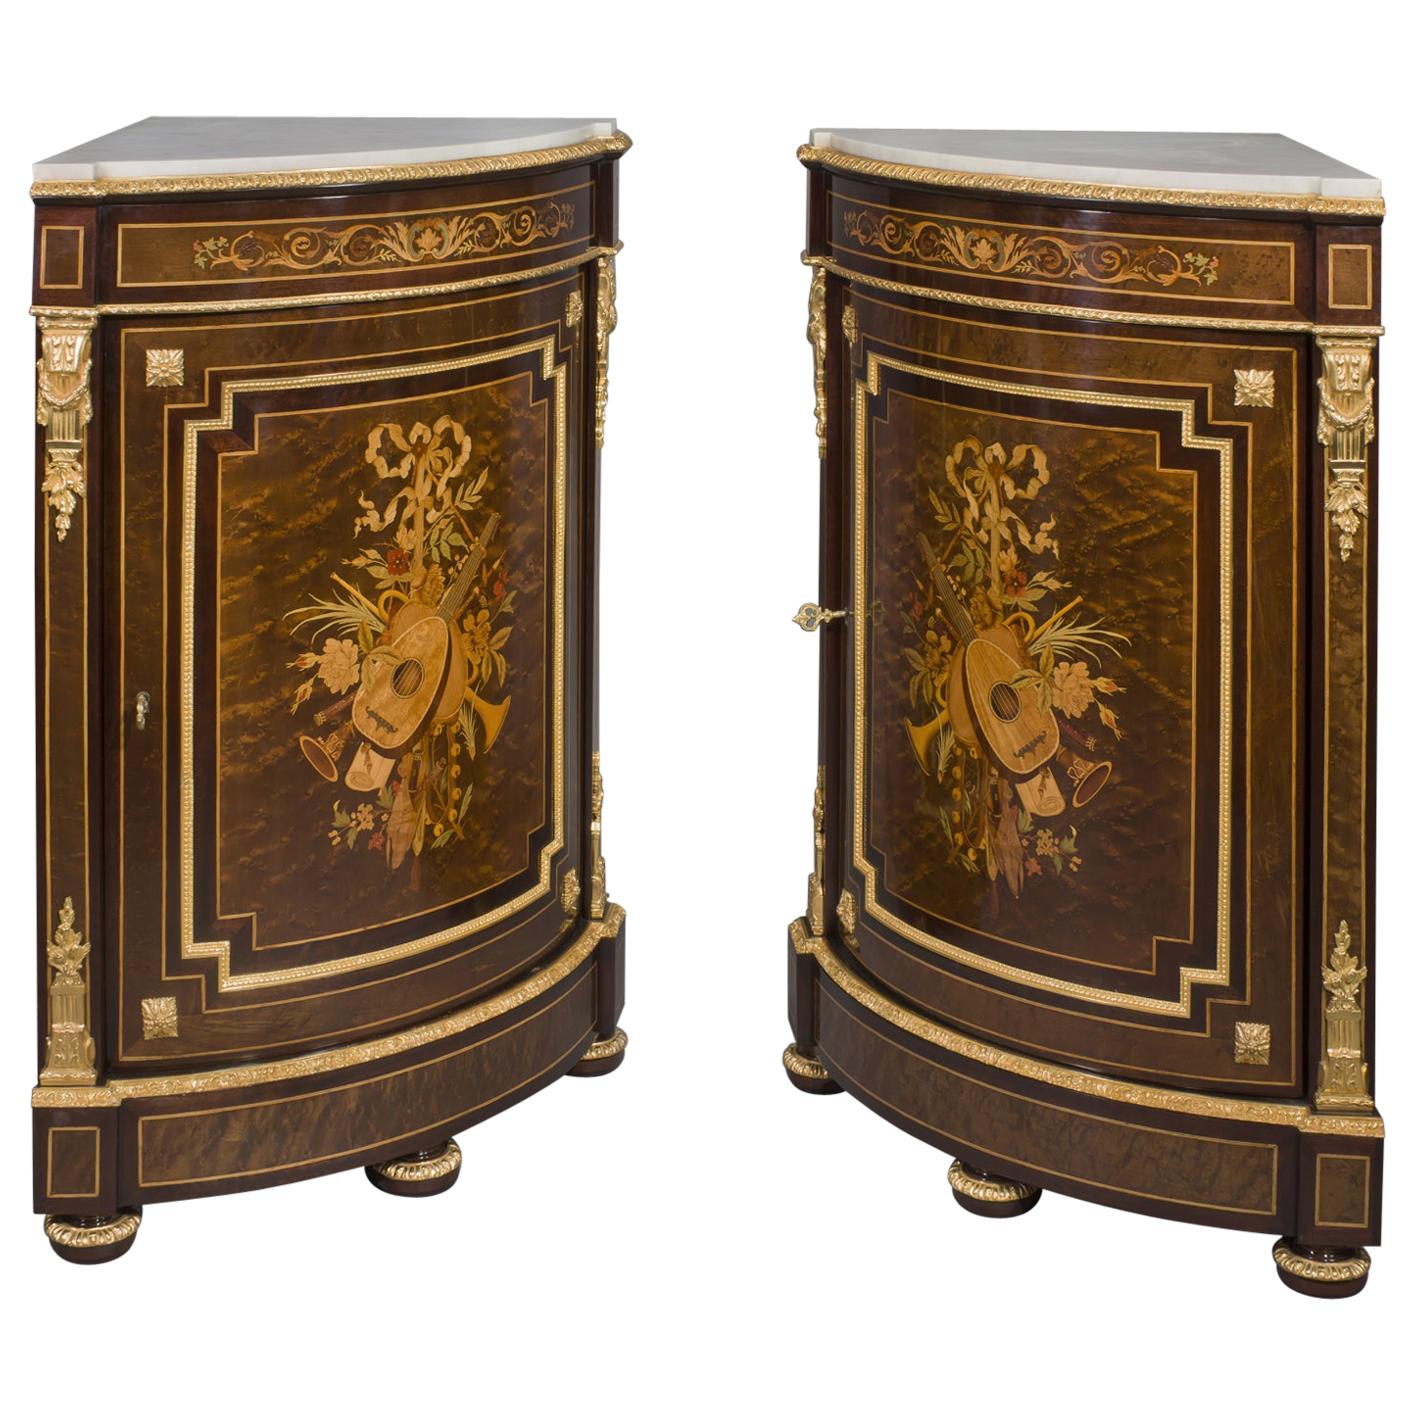 Louis XVI Style Marquetry Inlaid Encoignures by Paul Sormani, French, circa 1870